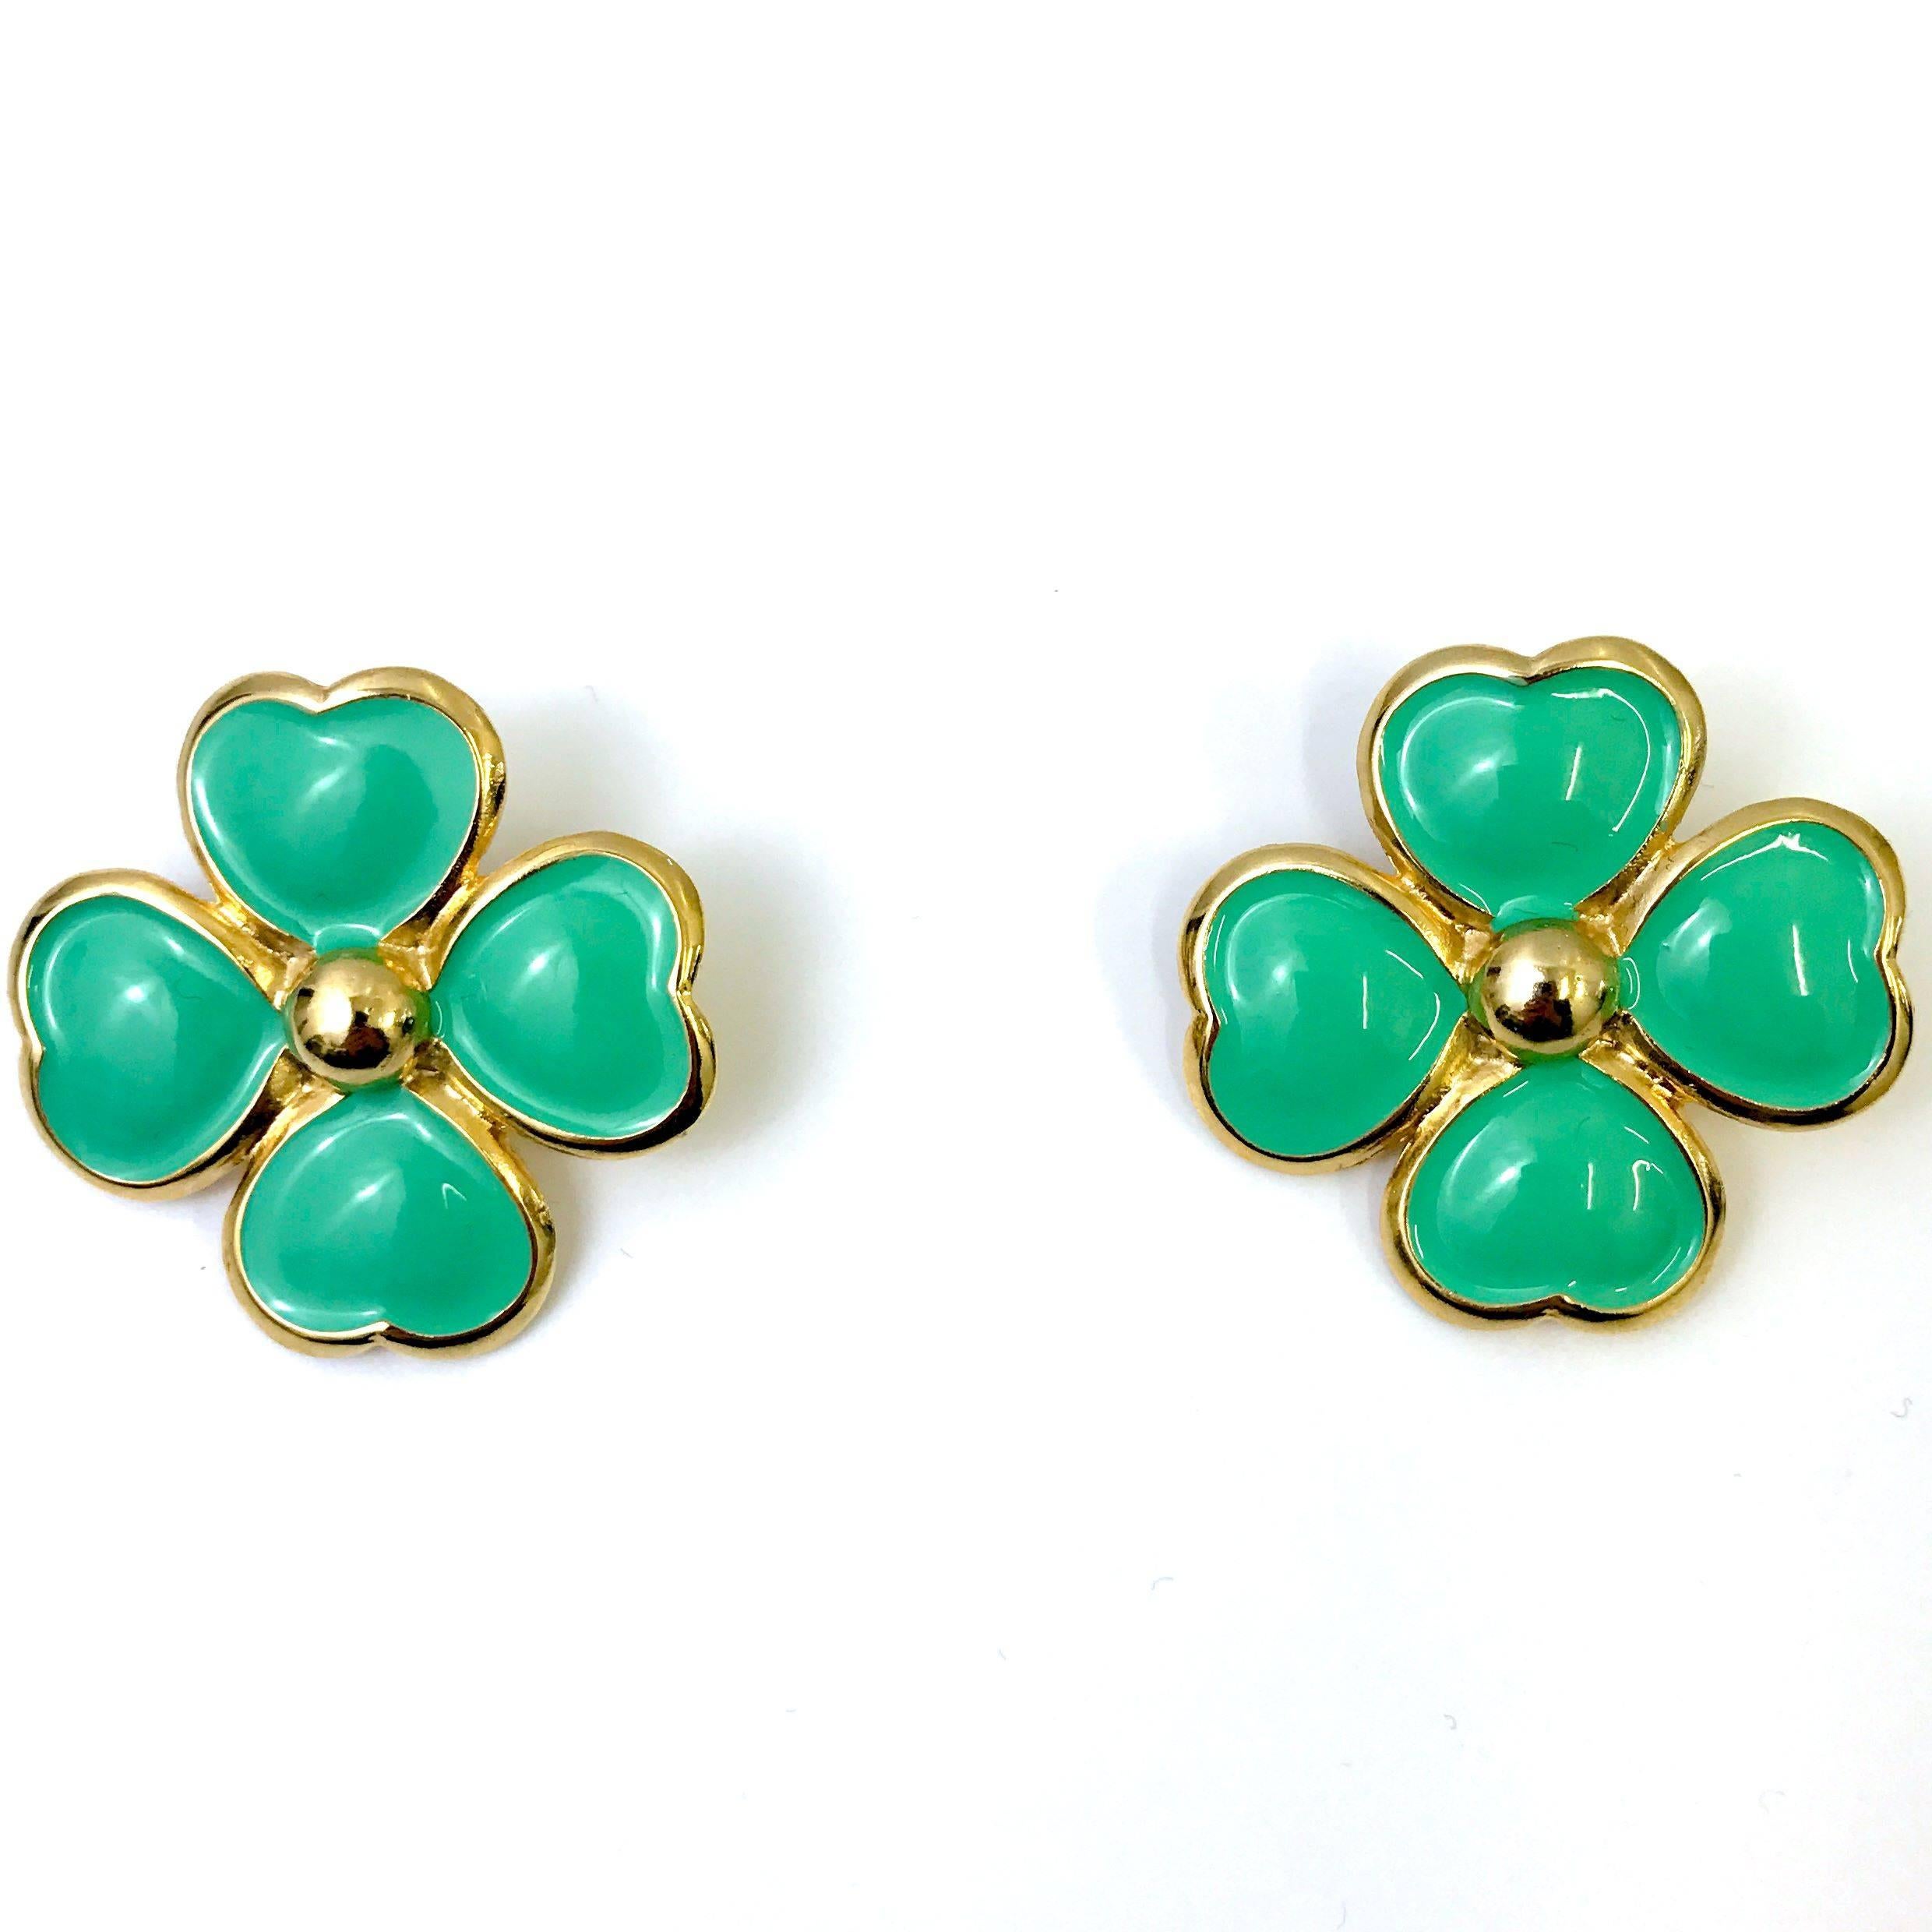 These flower clip on earrings by Gianni Versace feature a gold tone metal base. The real highlight of the piece is the light green enamel colouring which lifts any outfit. Finished with Gianni Versace made in italy stamp.